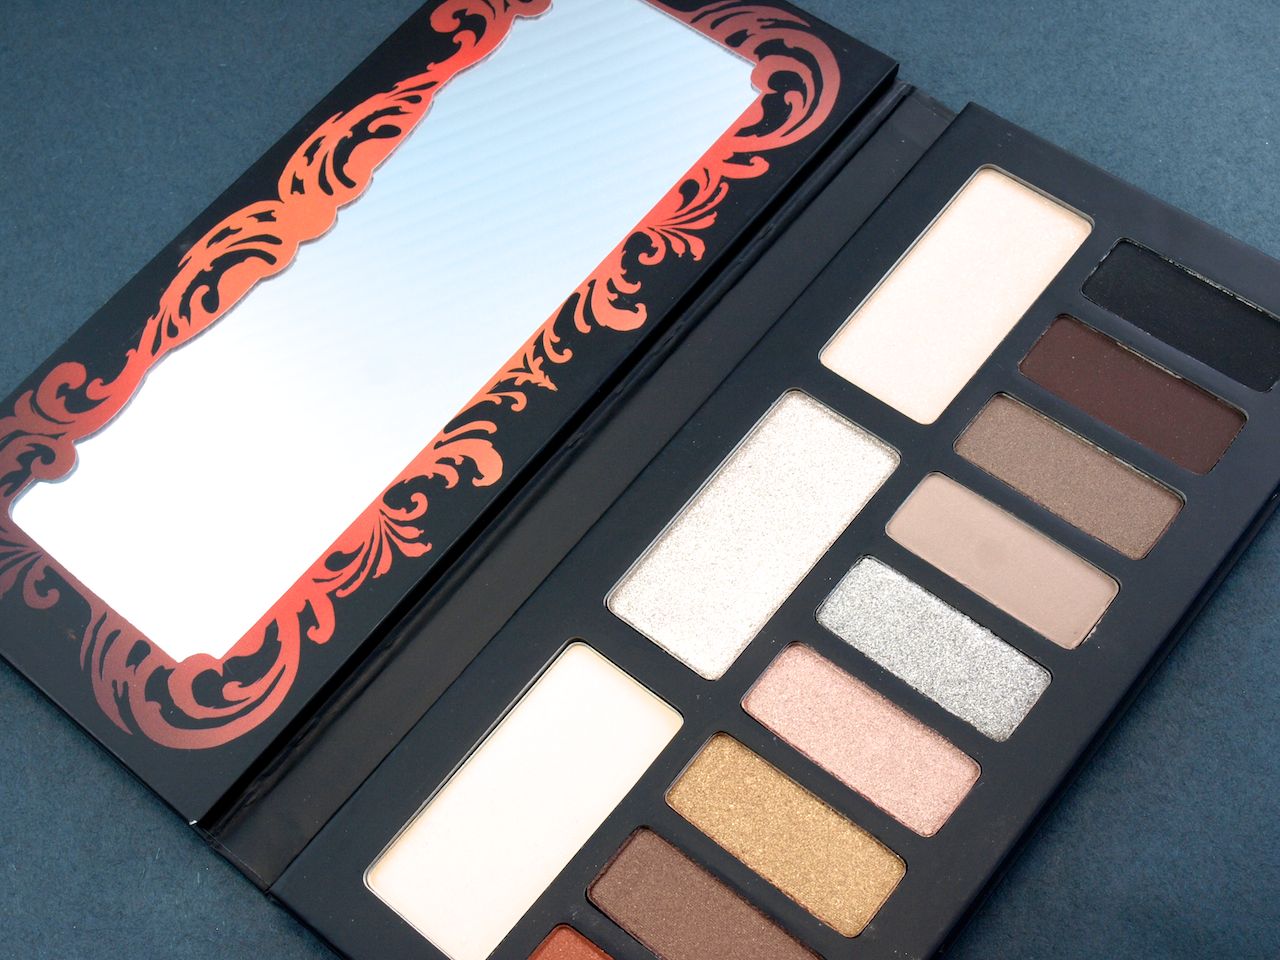 Kat Von D Monarch Eyeshadow Palette: Review and Swatches